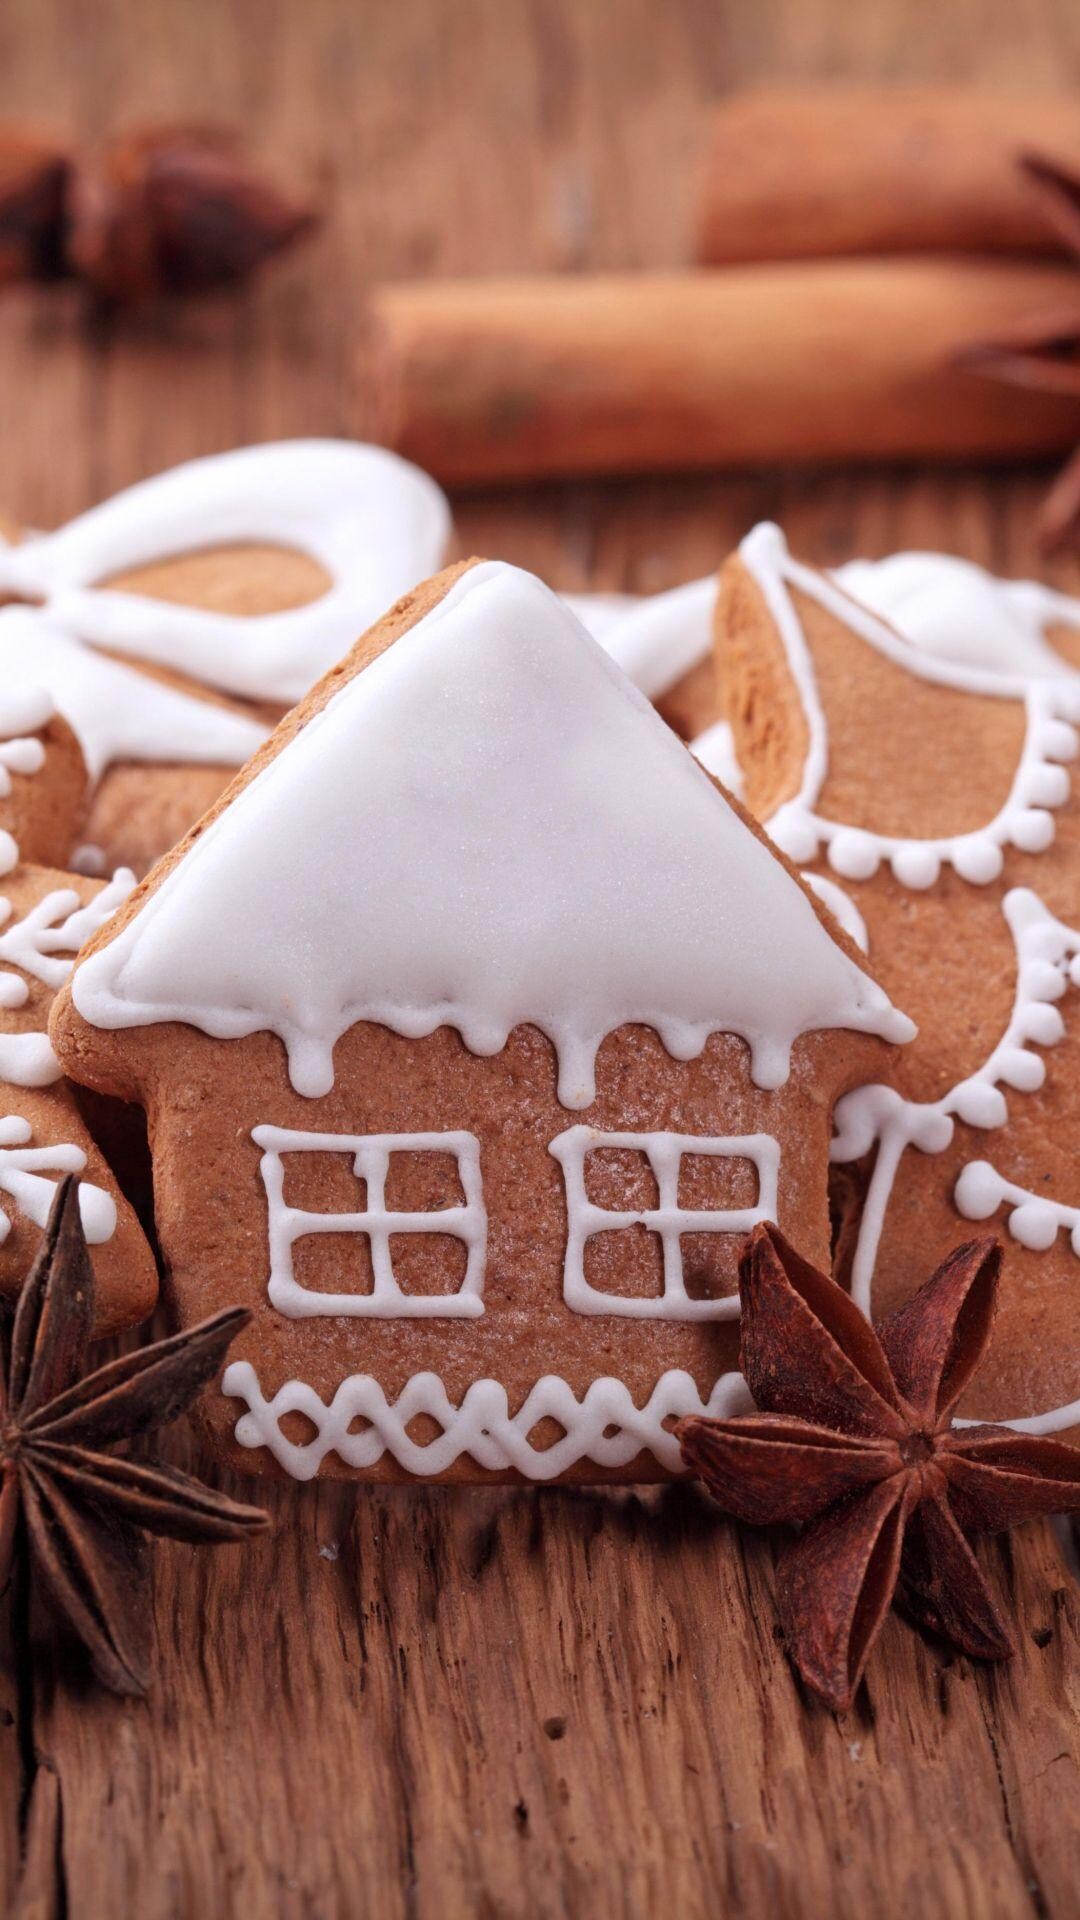 Gingerbread House: Gingersnap cookies, Variety of shapes, Christmas bakery, A charming and sweet tradition. 1080x1920 Full HD Wallpaper.